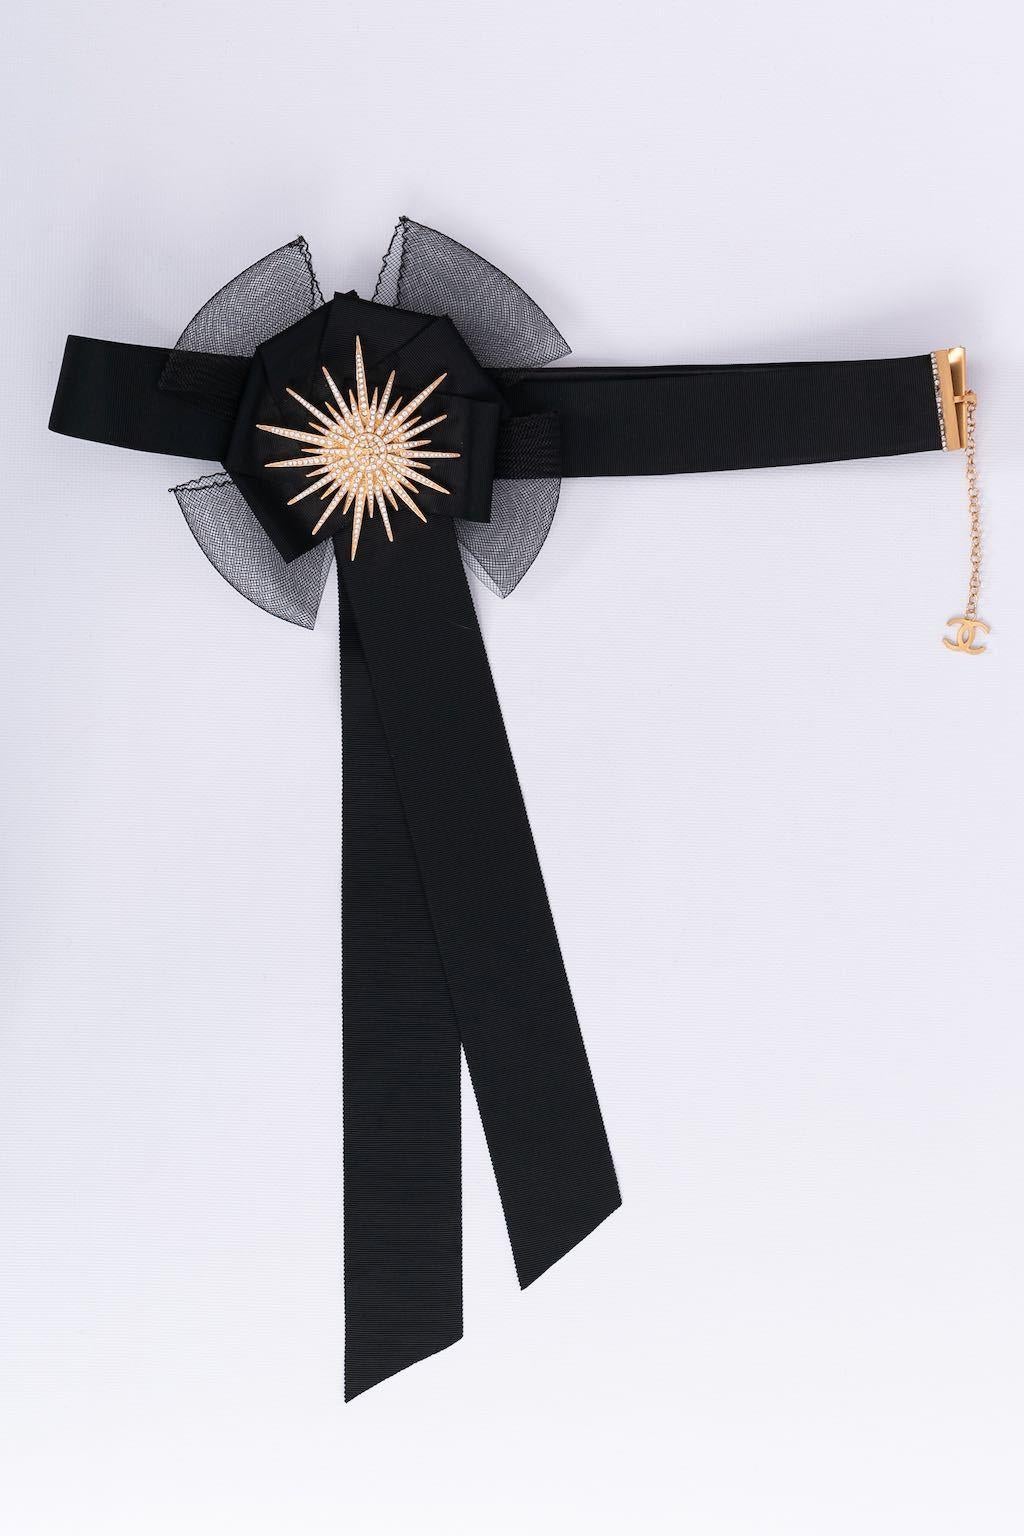 Chane (Made in France) Belt composed of leather and canvas, decorated with tulle and a gilded metal star paved with rhinestones. 2001 Spring - Summer Collection.

Additional information: 
Dimensions: Length: 80 cm to 90 cm (31.49 in x 35.43 in) x